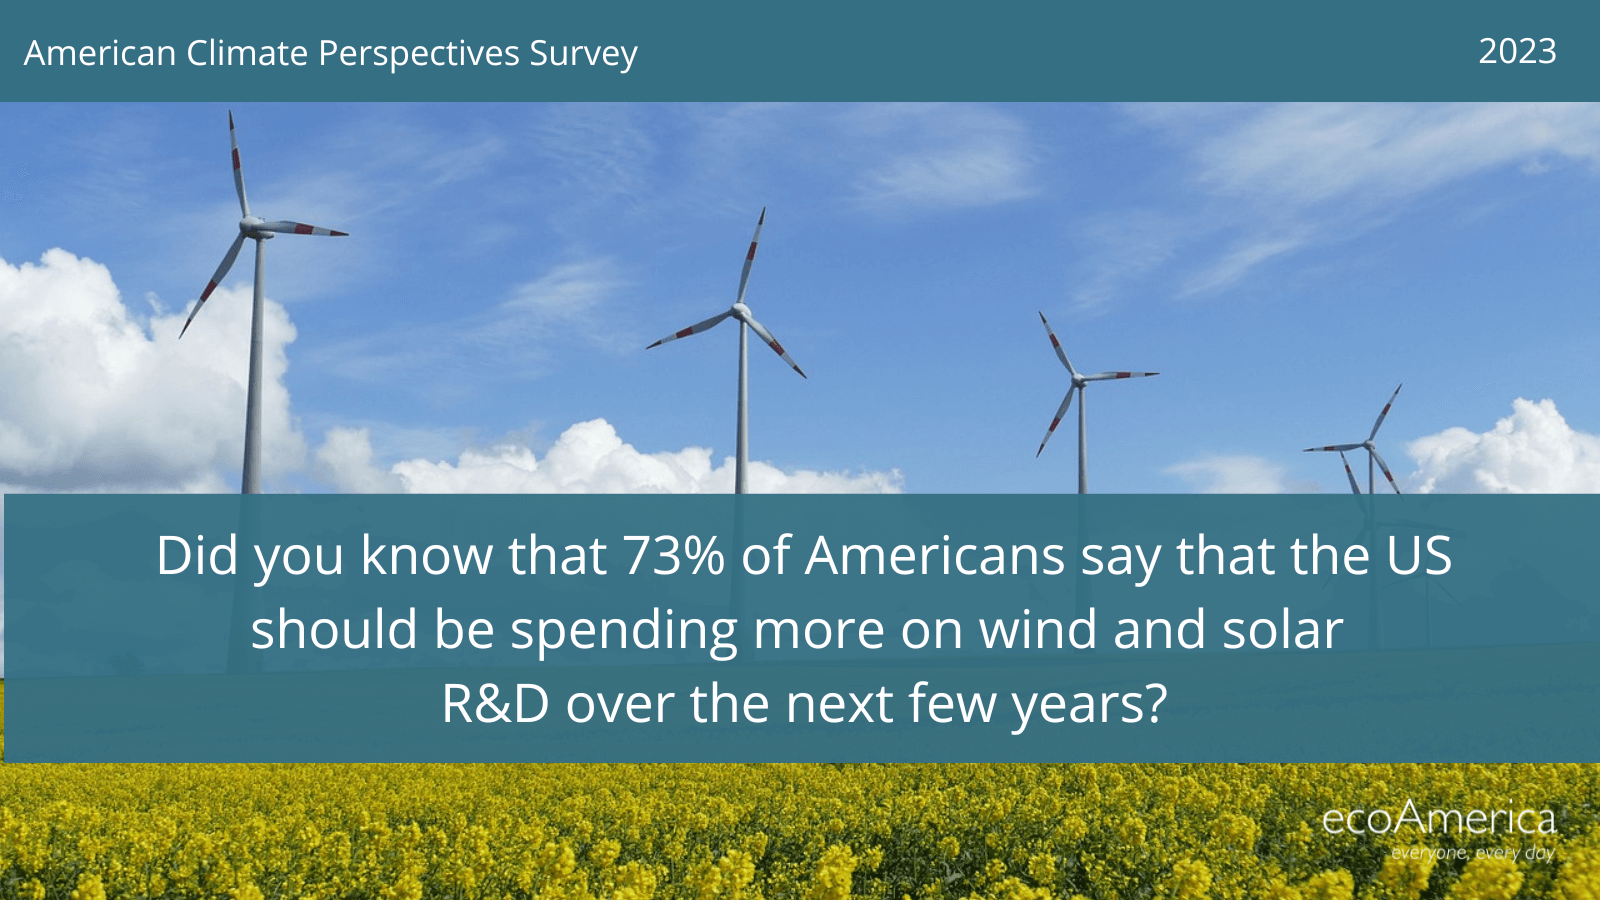 Wind turbines in a sunny field with the text overlay reading "DId you know that 73% of Americans say that the US should be spending more on wind and solar R&D over the next few years?"